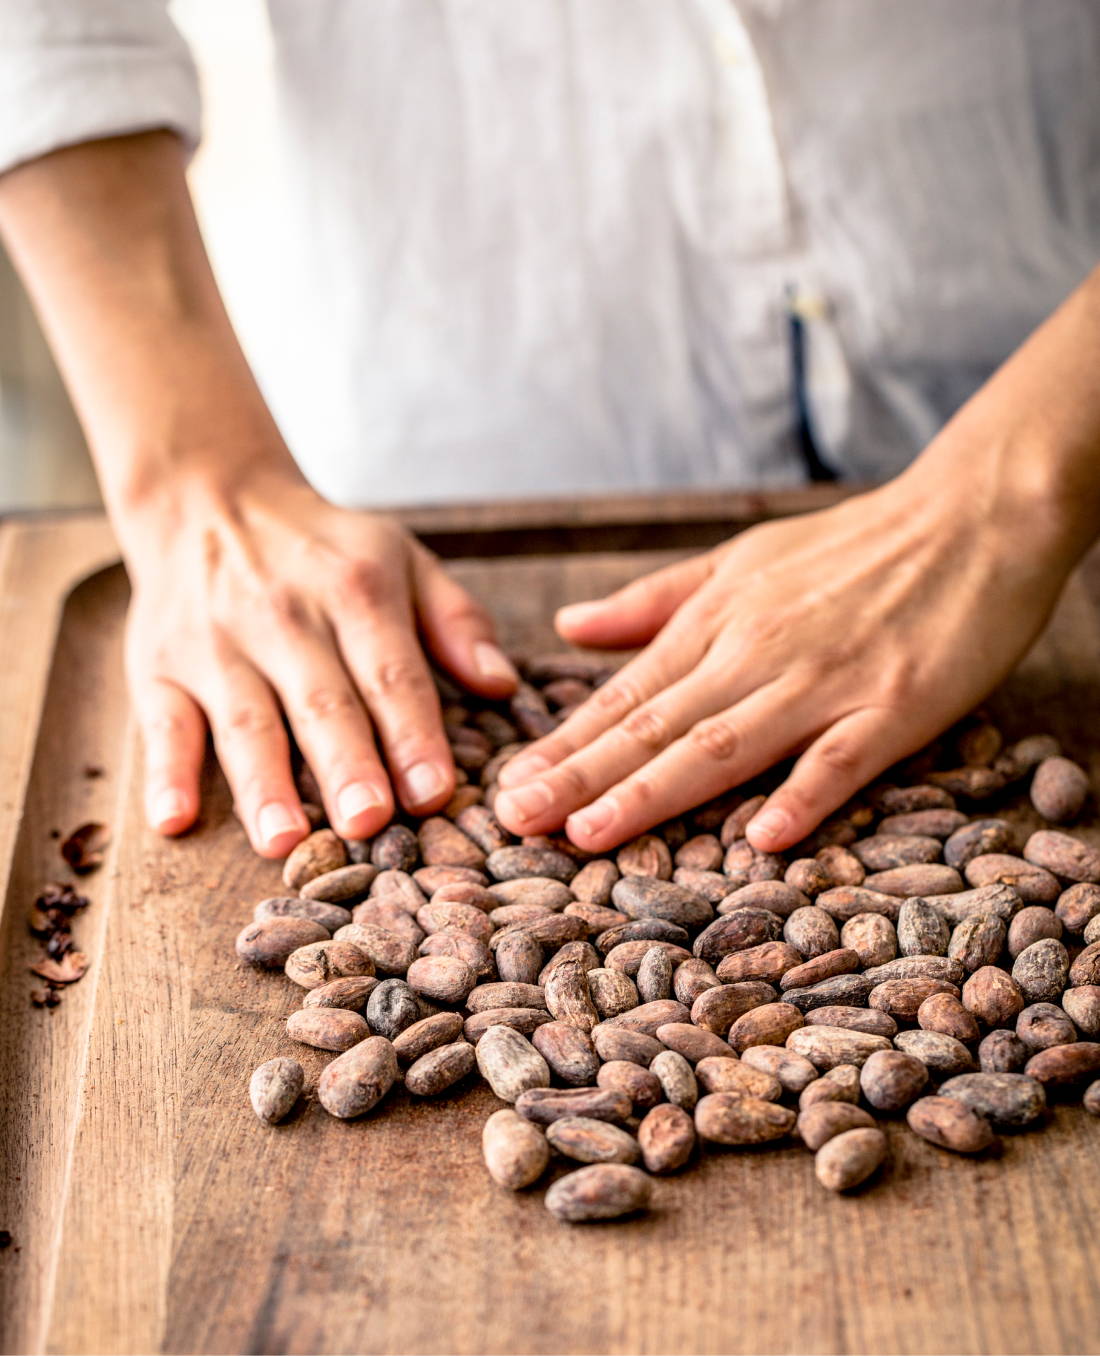 Hands on cococa beans